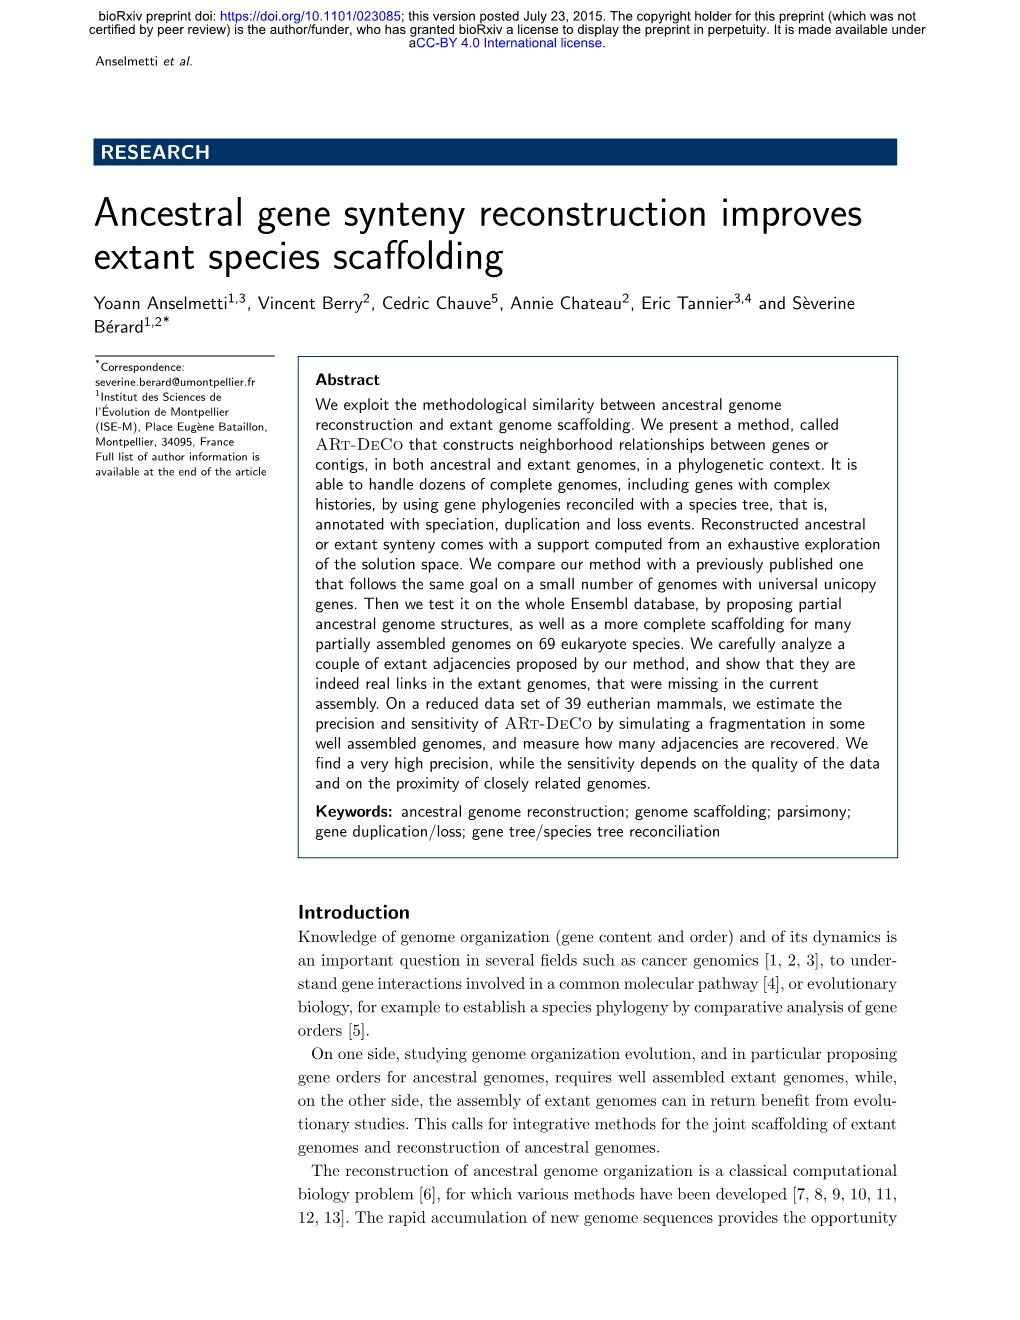 Ancestral Gene Synteny Reconstruction Improves Extant Species